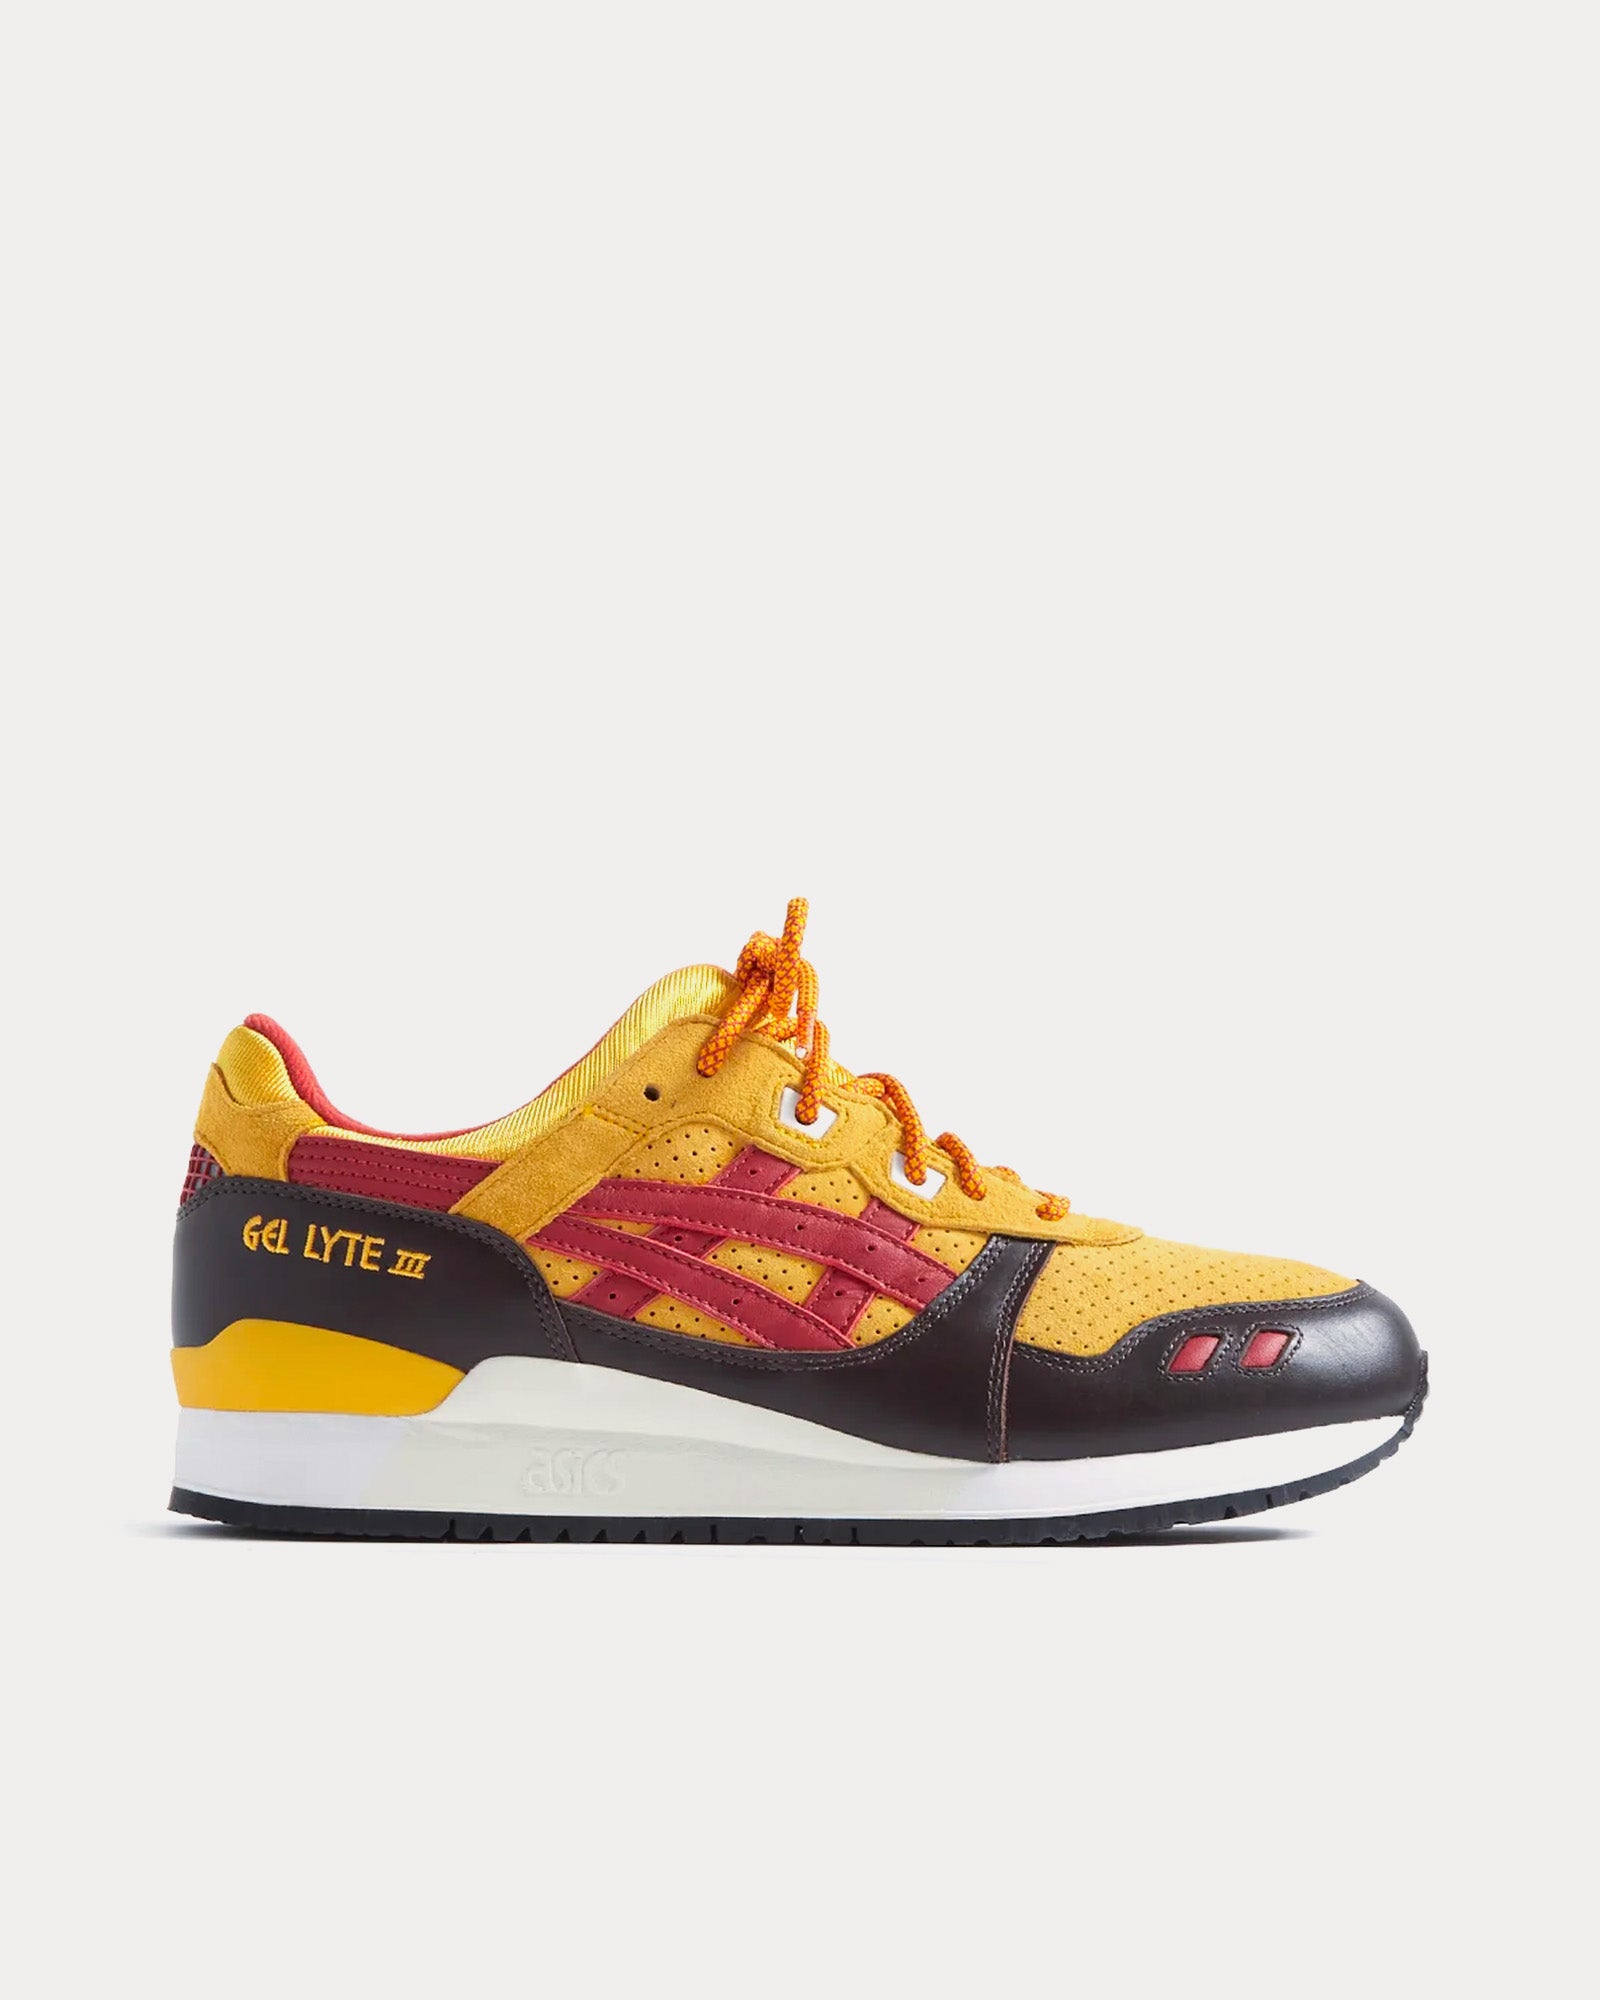 Asics x Kith - Marvel Gel-Lyte III Remastered 'Wolverine 1980' Yellow / Red Low Top Sneakers